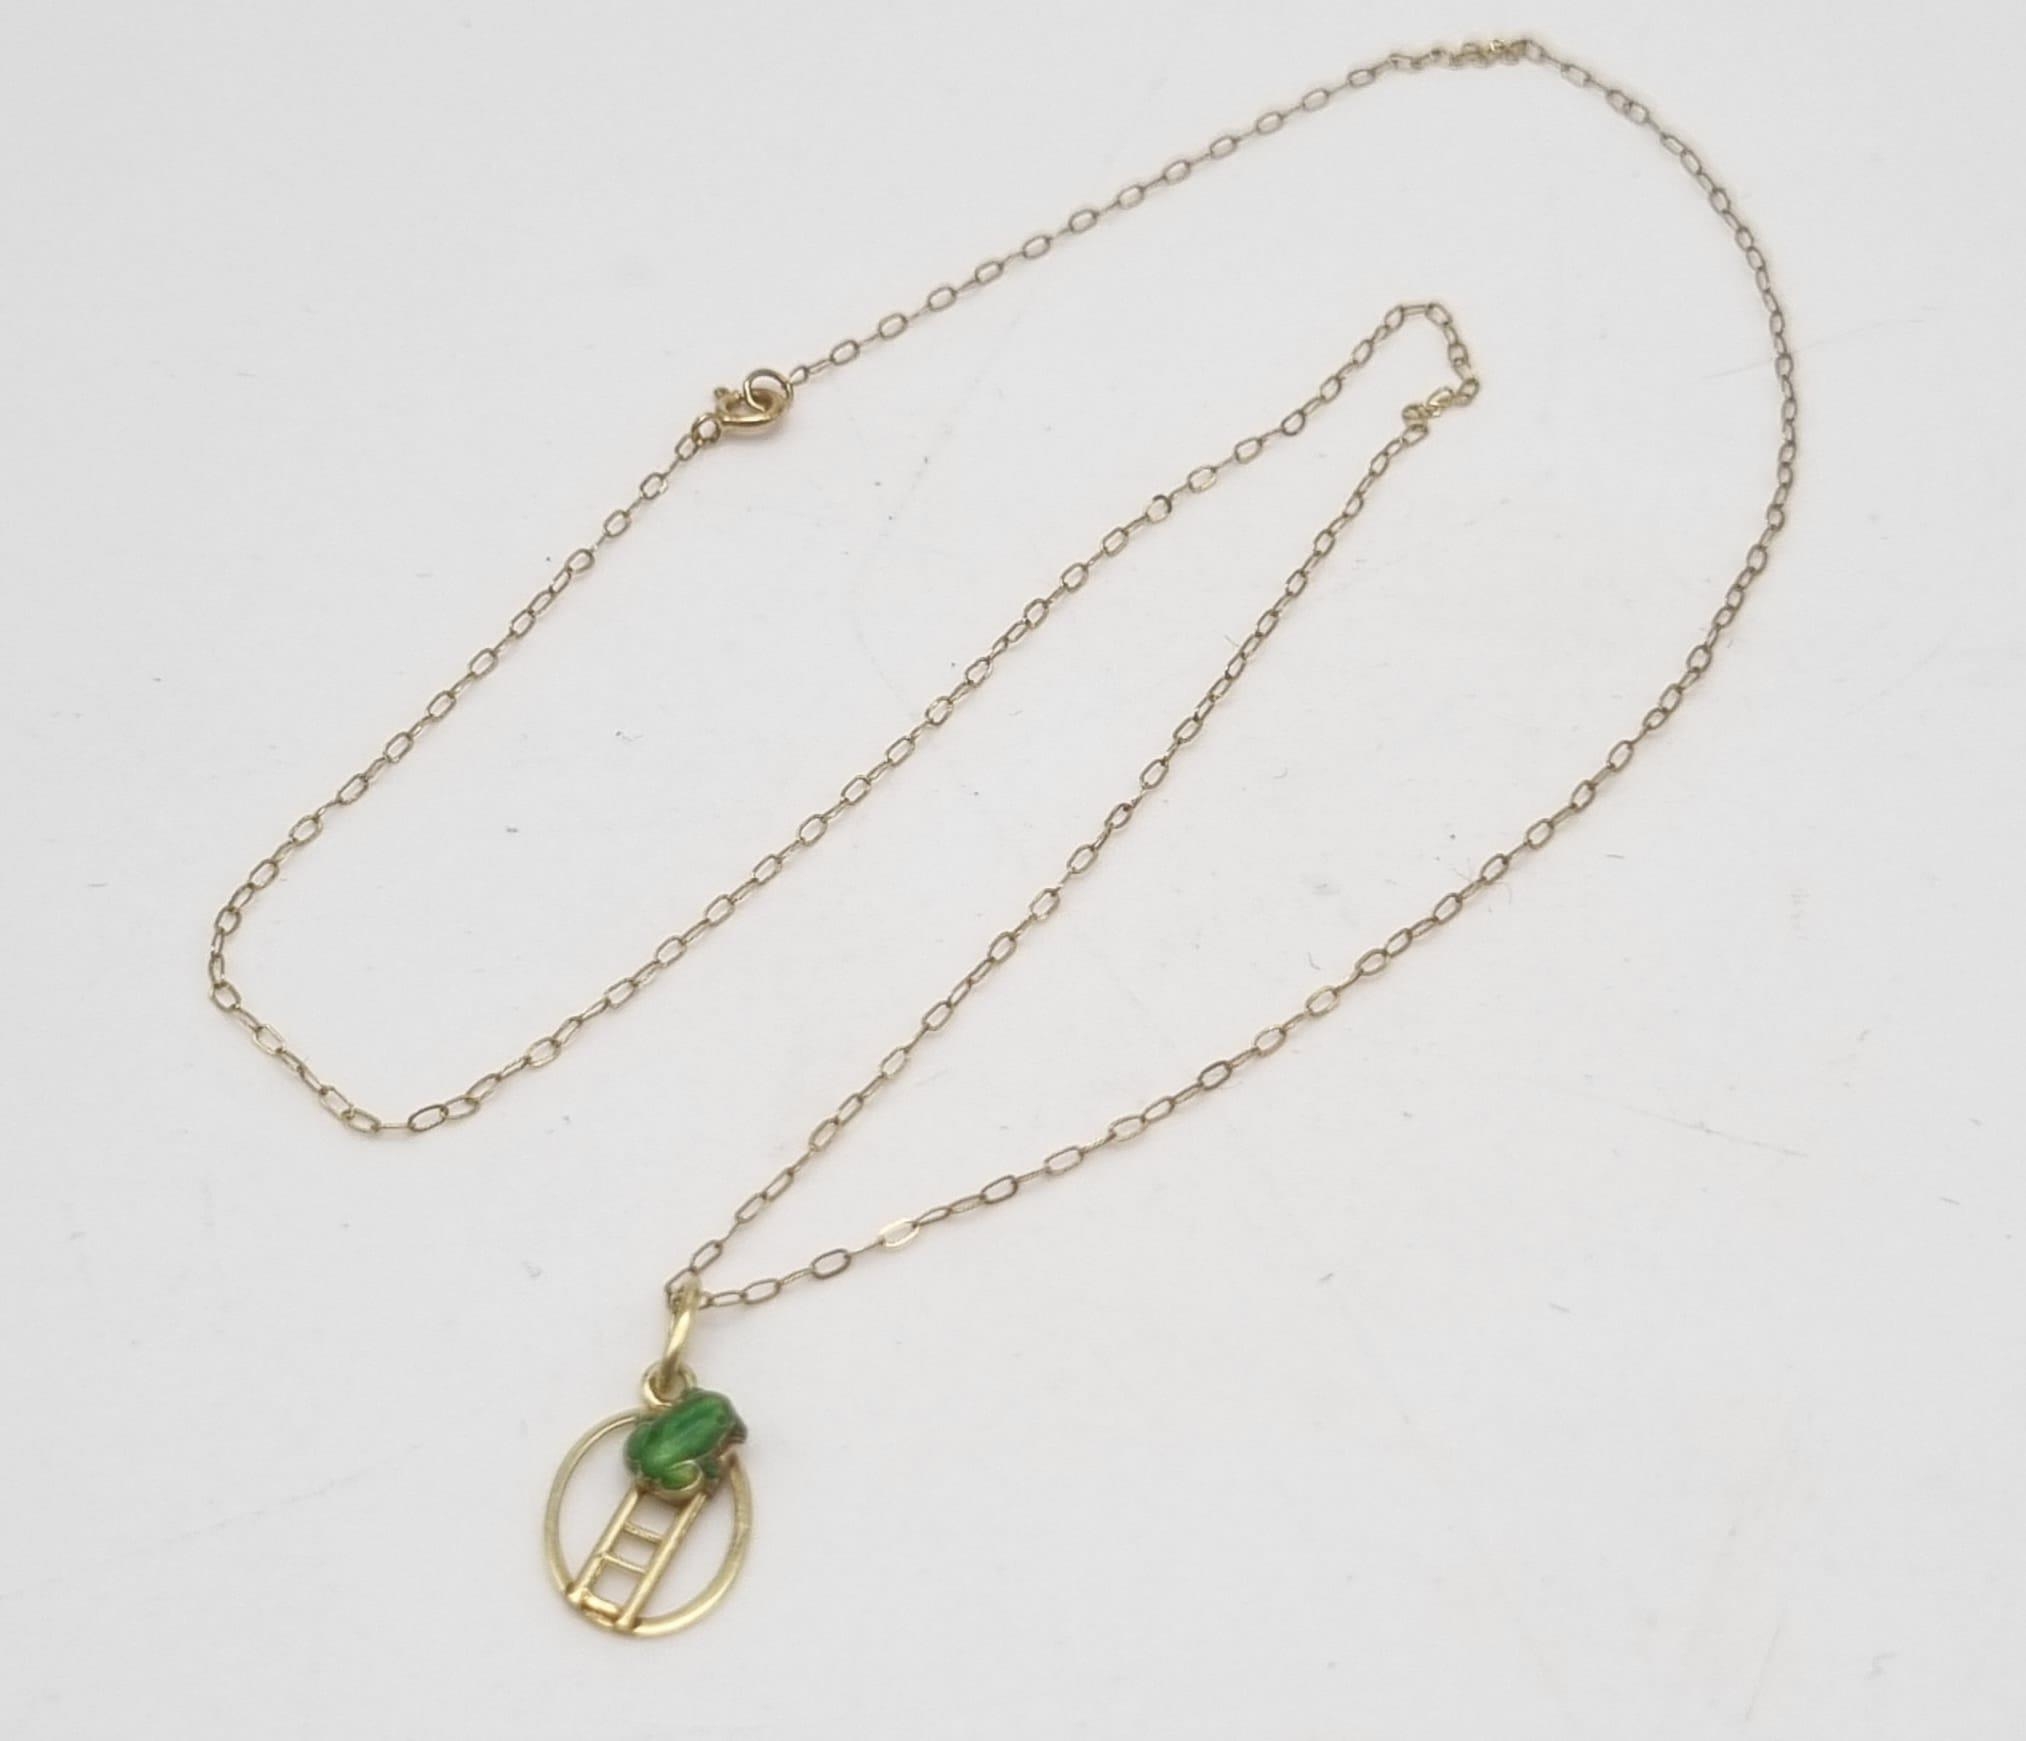 A 9K Yellow Gold Disappearing Necklace with Frog and Ladder Pendant. 44cm. 0.83g